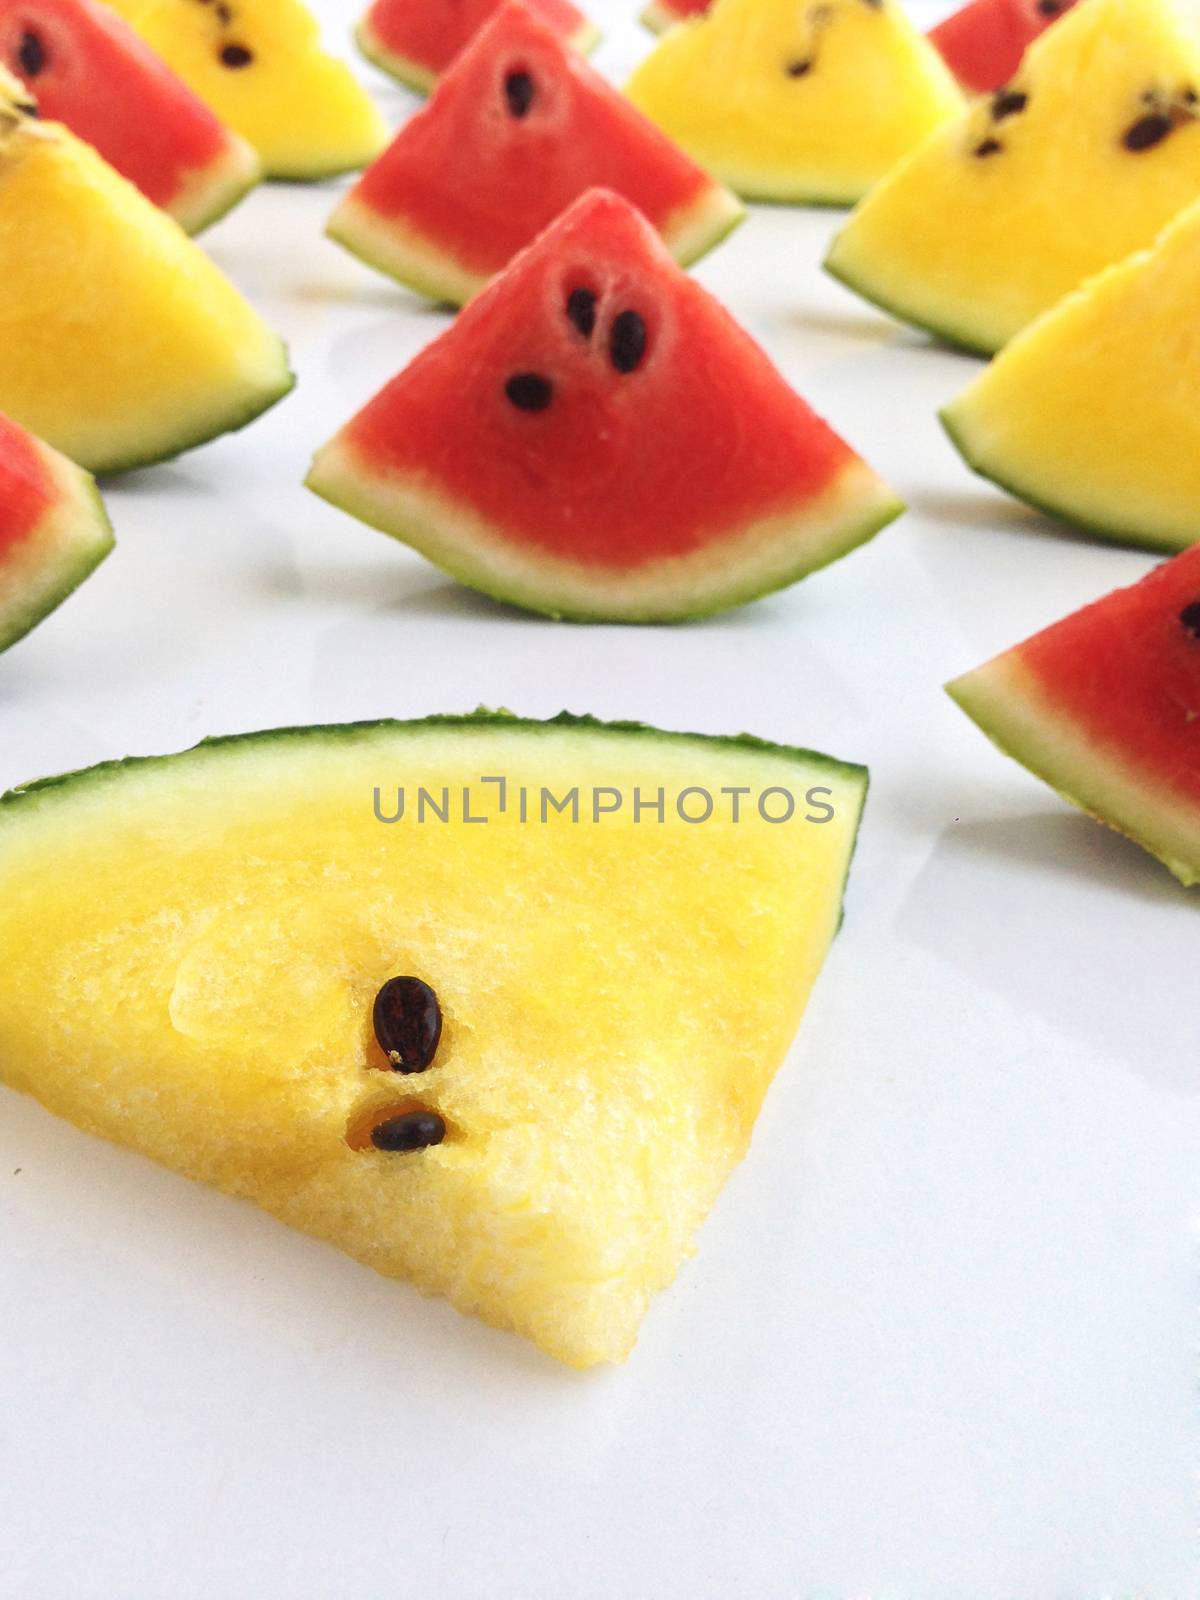 slices of red and yellow watermelon on white background by Bowonpat